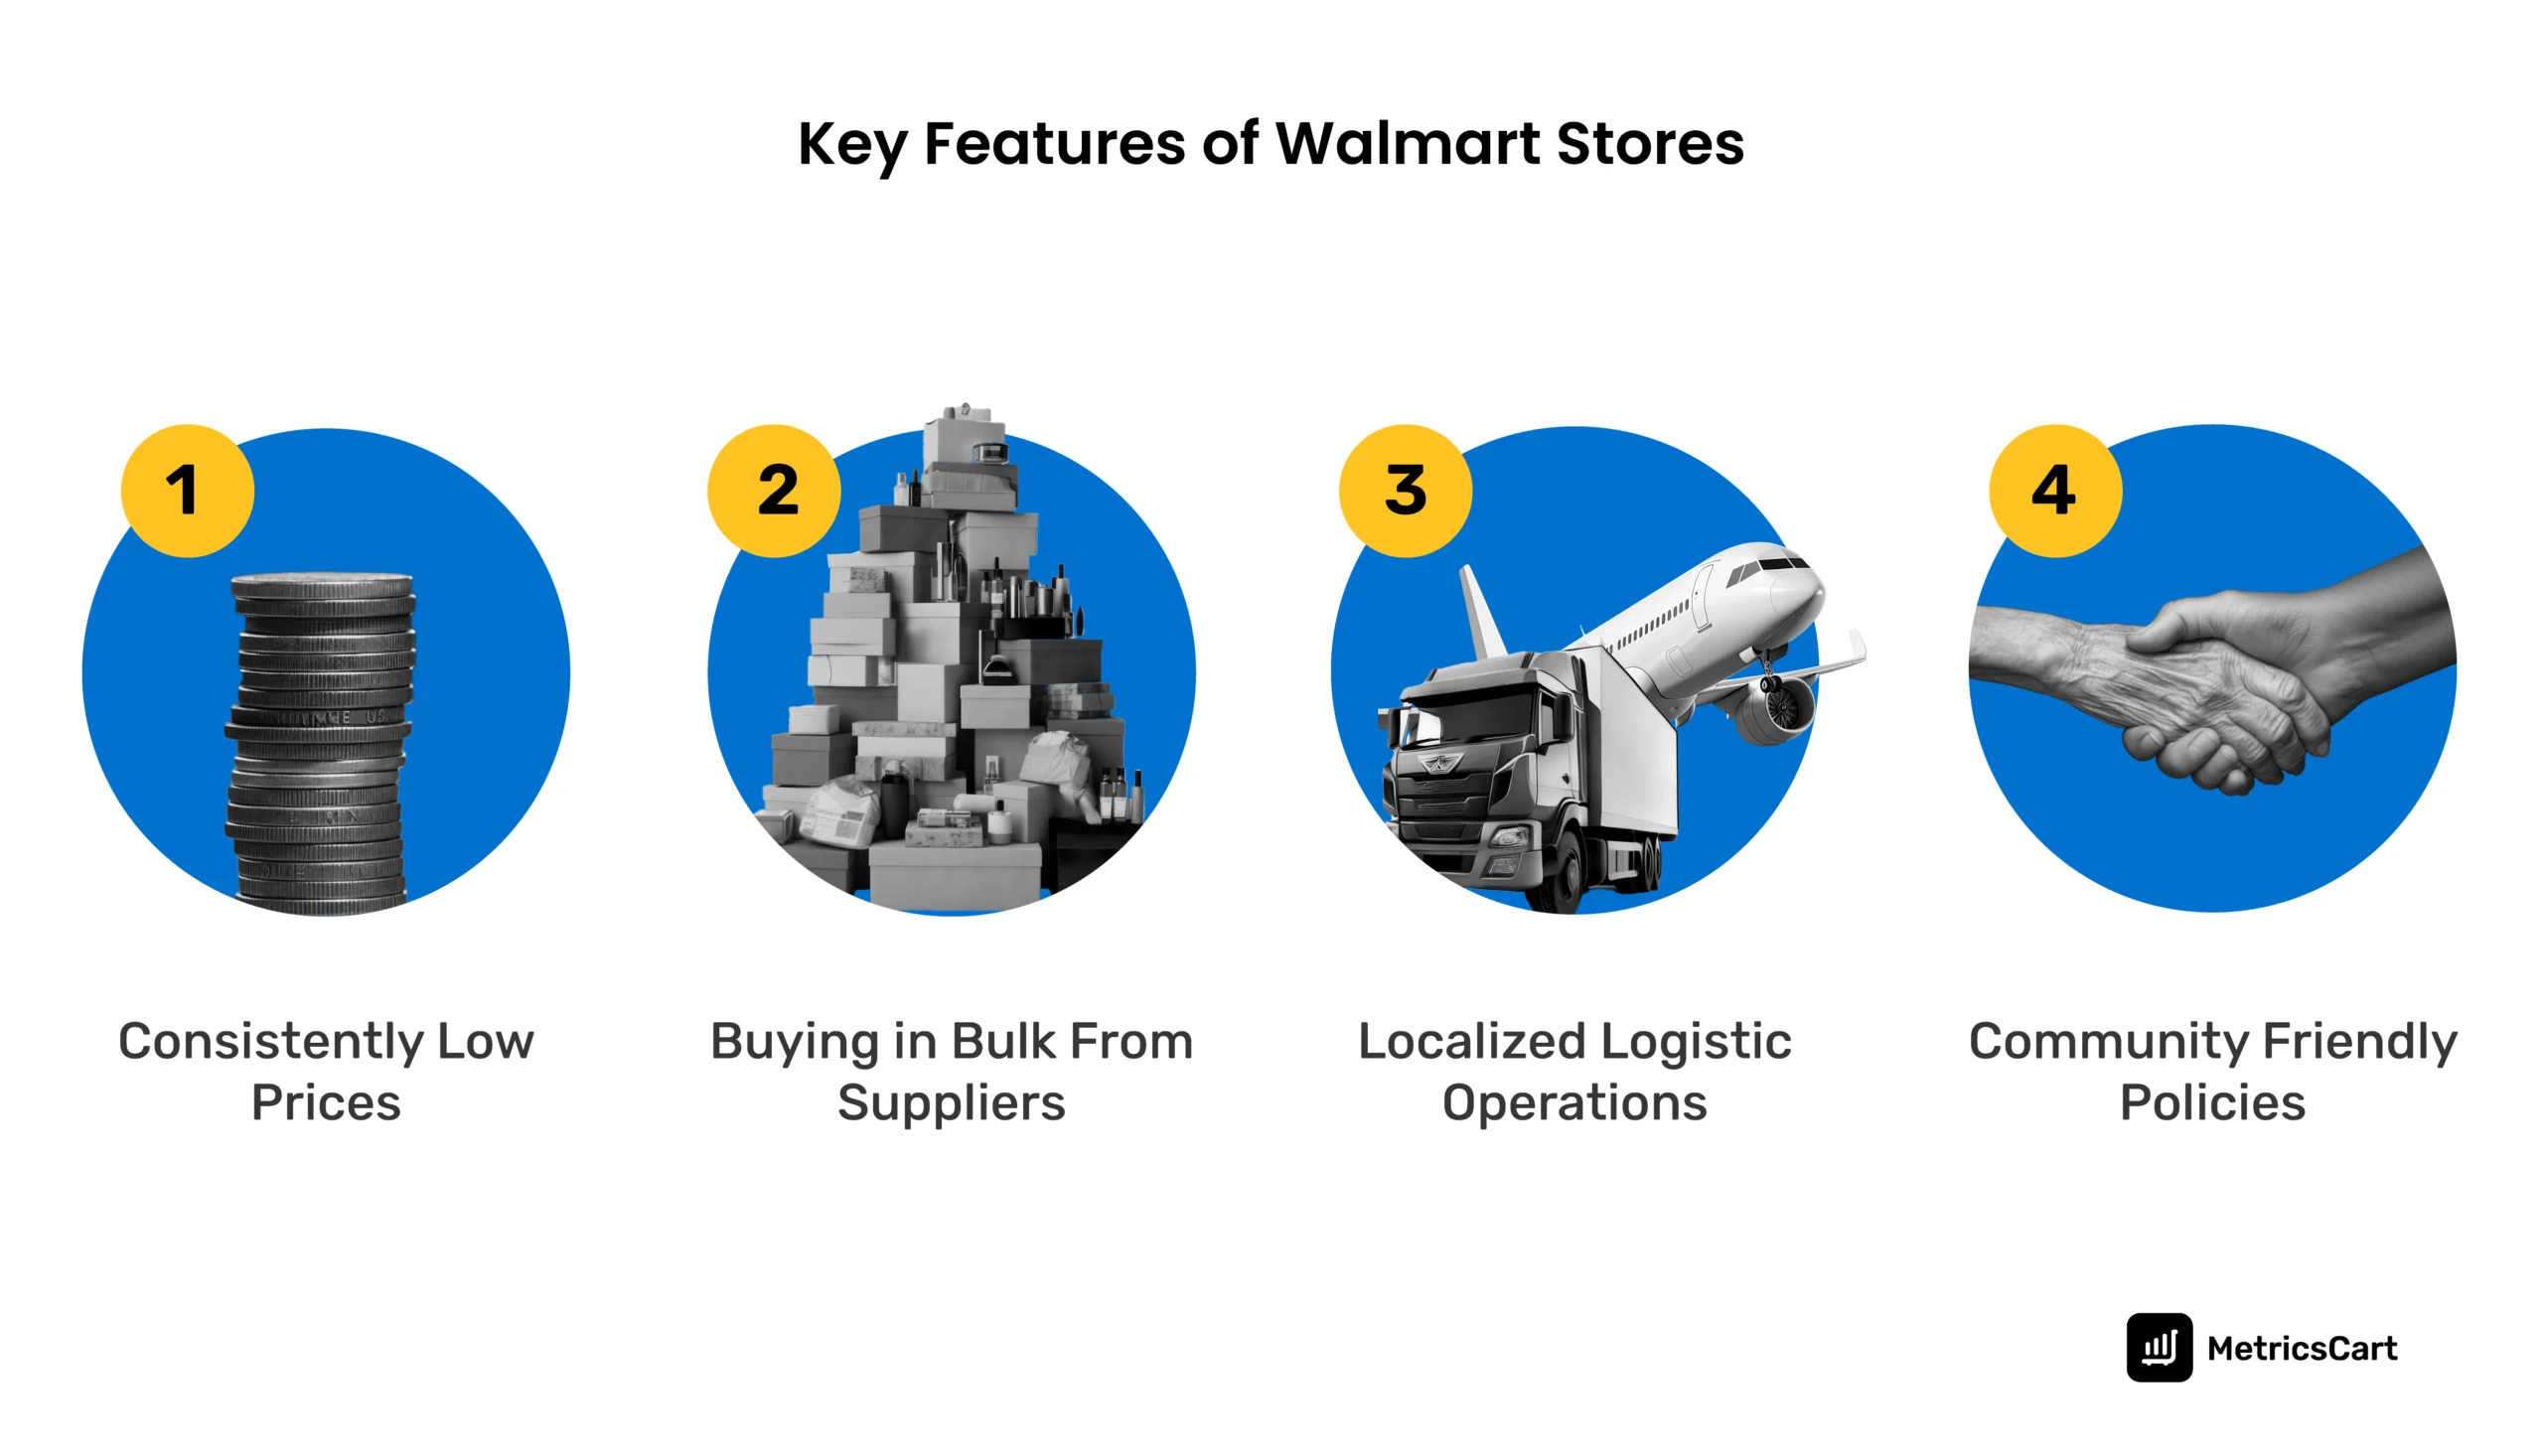 The key features of Walmart stores